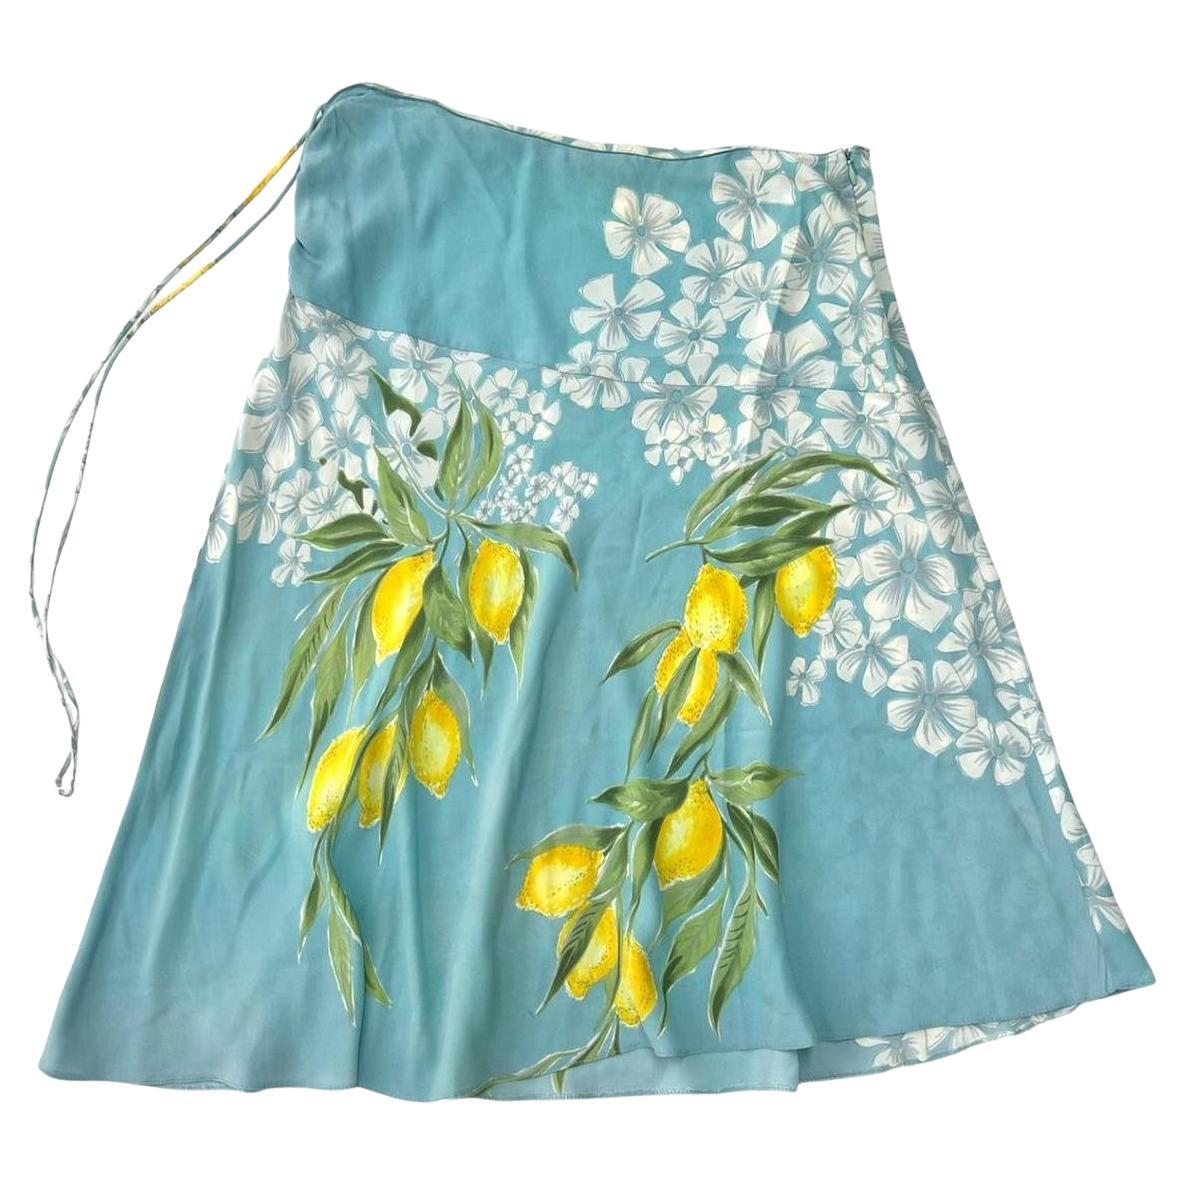 Early 2000s Blumarine Silk Midi Skirt In Light Blue With Floral And Lemon Print For Sale